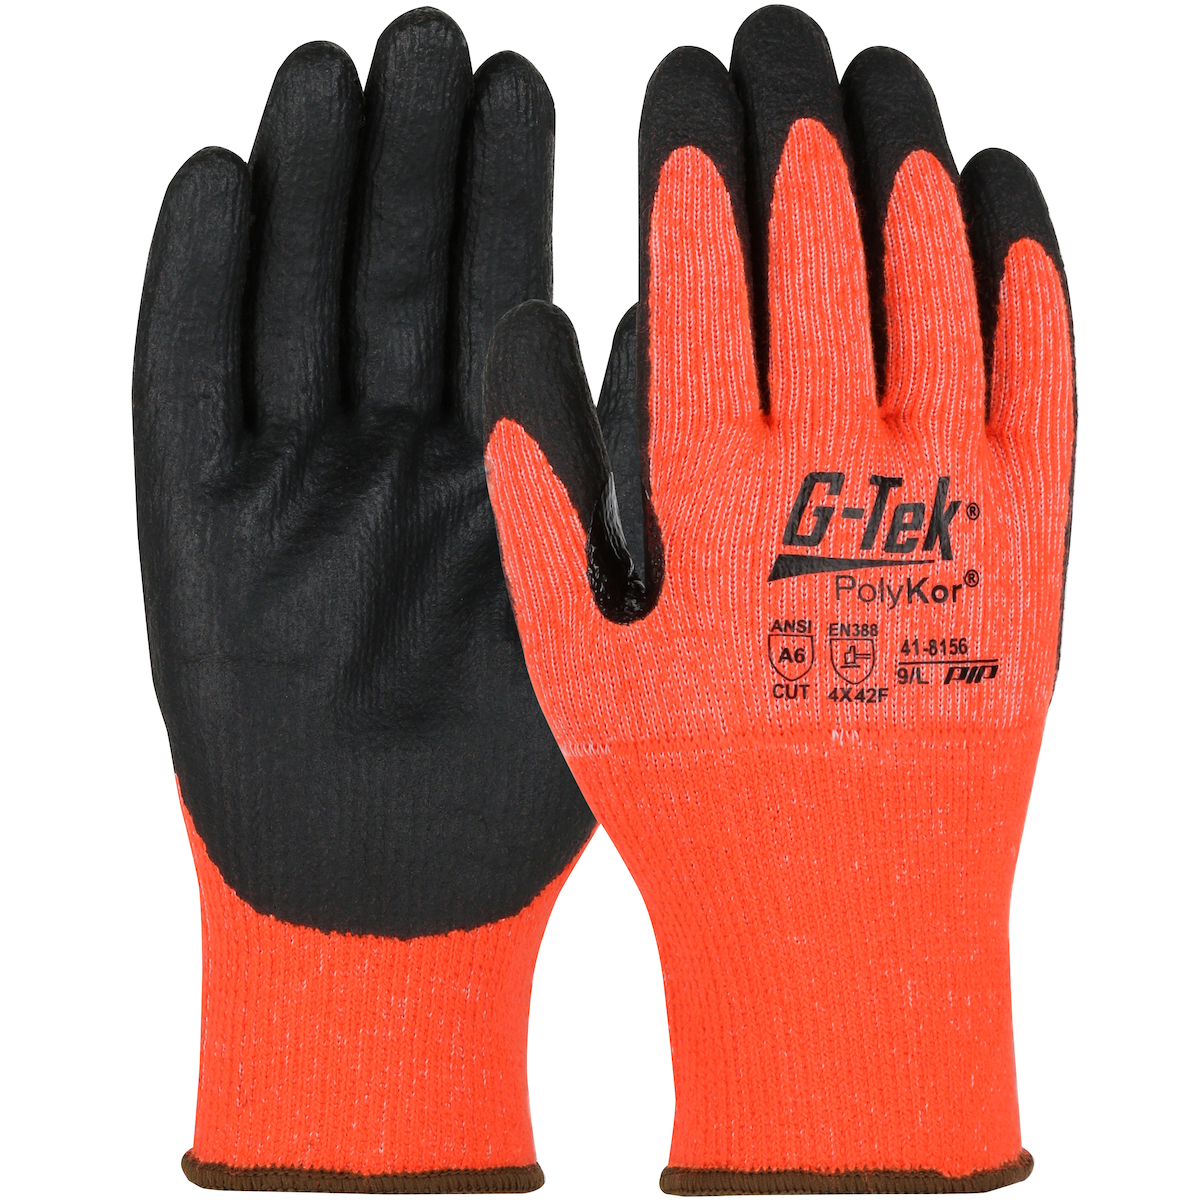 #41-8156 PIP® G -Tek® PolyKor® Seamless Knit Hi-Viz Winter Work Glove with Nitrile MicroSurface Grip on Palm & Fingers - Touchscreen Compatible